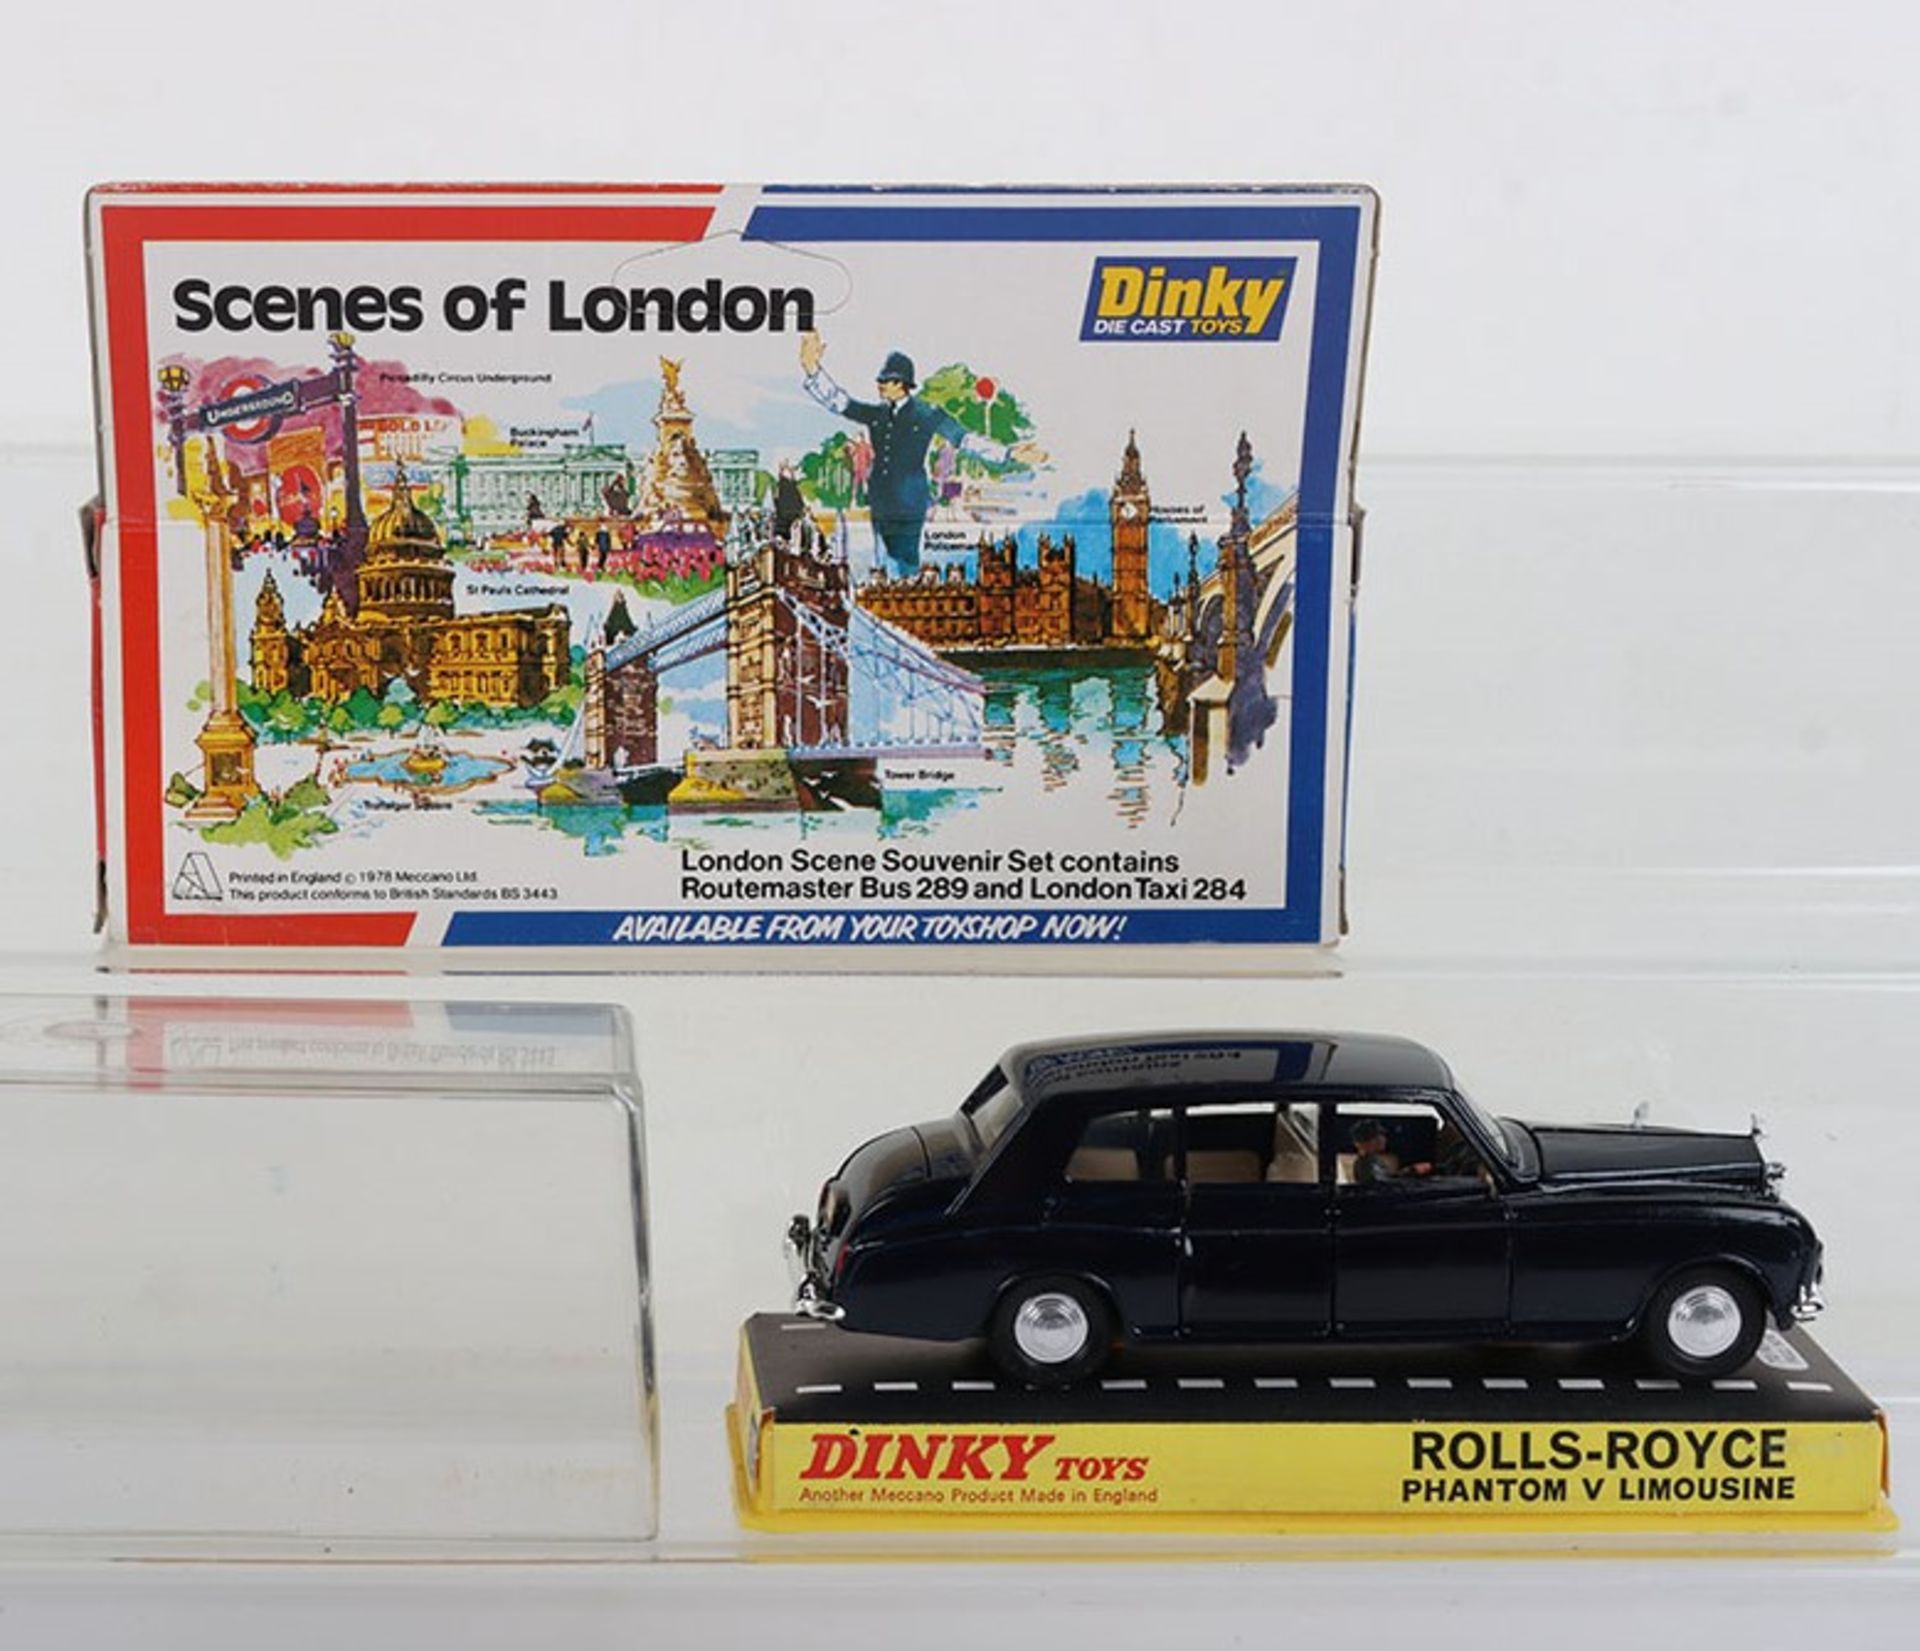 Two Dinky Toys Rolls Royce Phantom V Limousines - Image 3 of 6